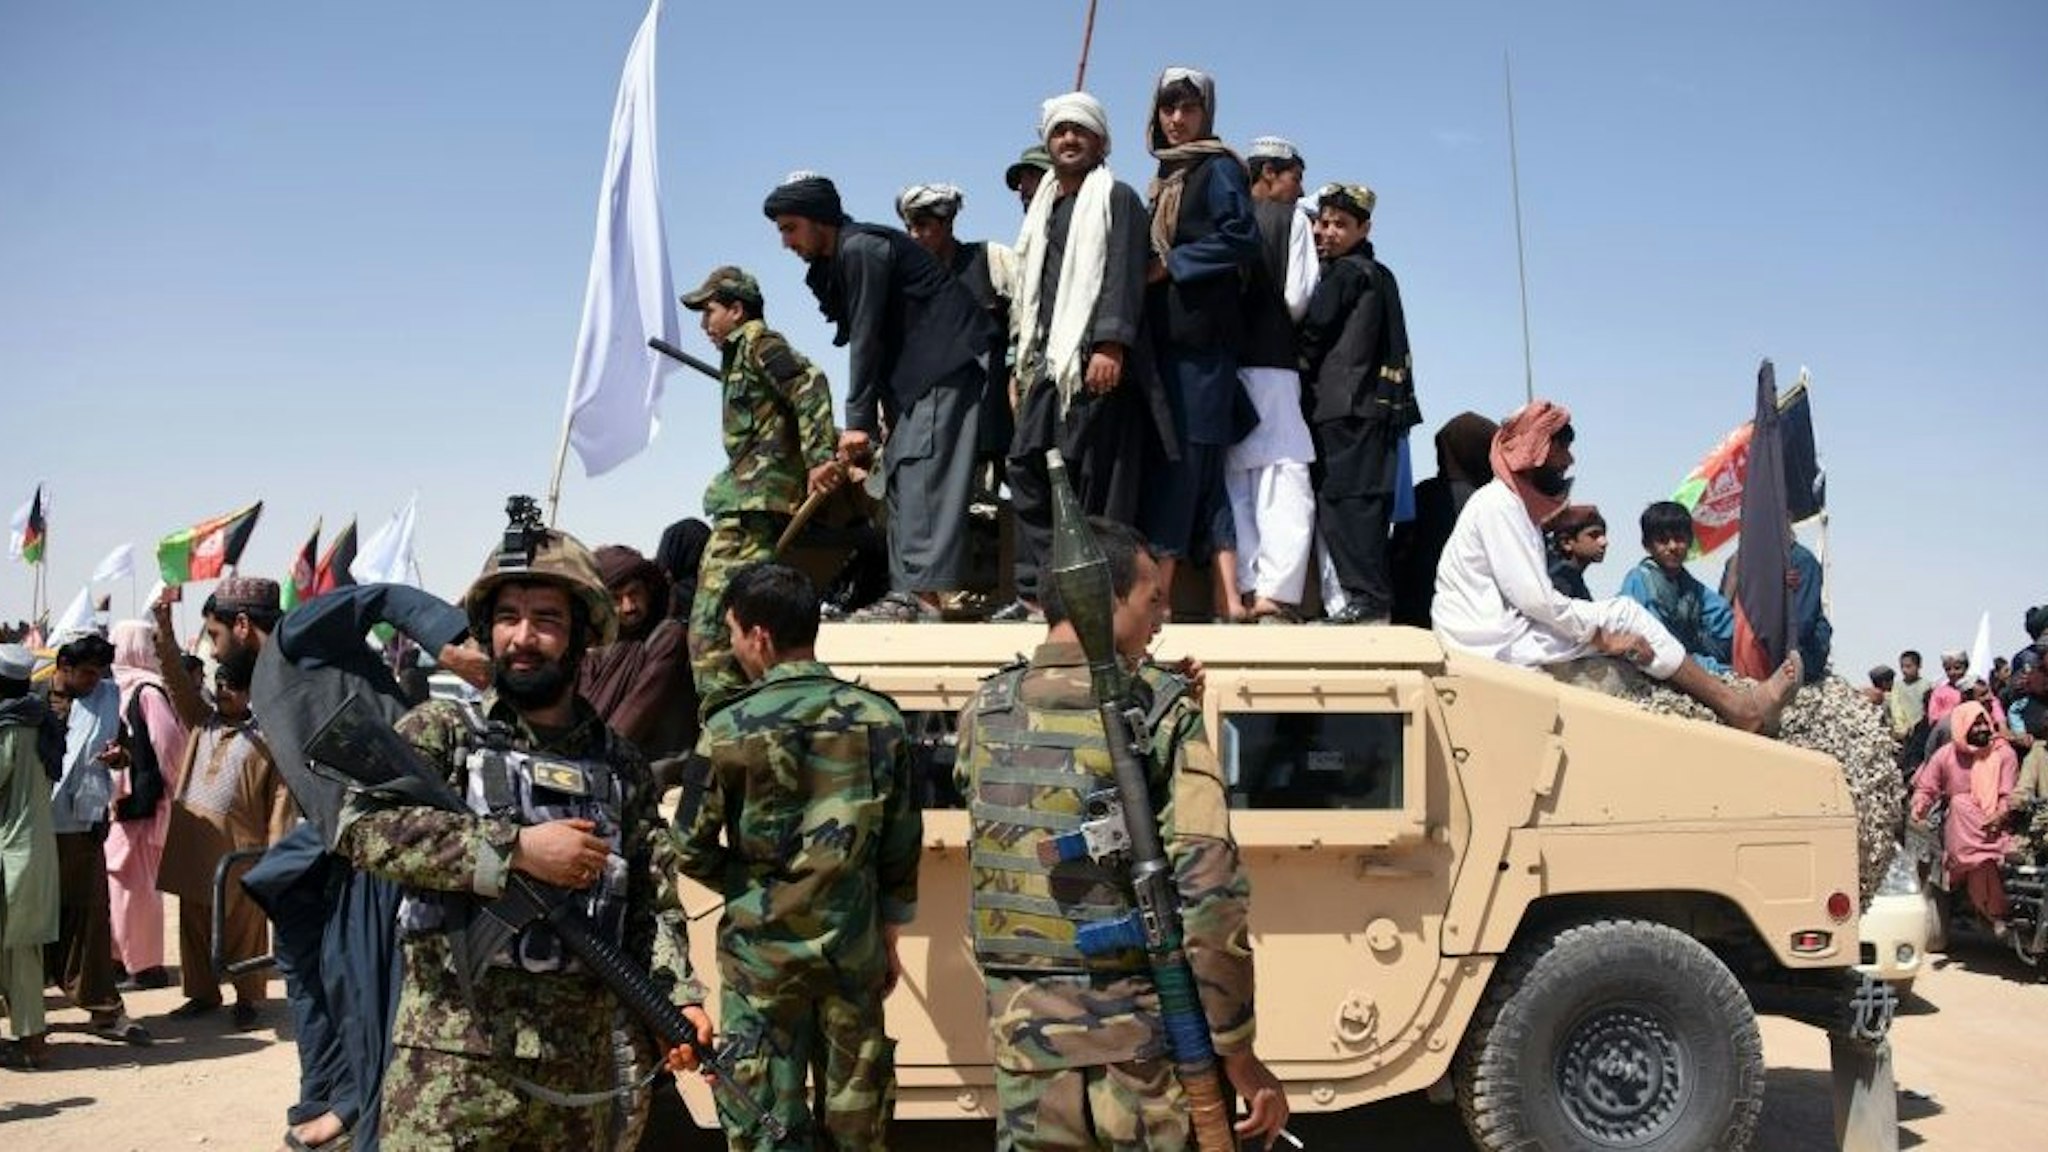 In this photo taken on June 17, 2018, Afghan Taliban militants and residents stand on a armoured Humvee vehicle of the Afghan National Army (ANA) as they celebrate a ceasefire on the third day of Eid in Maiwand district of Kandahar province. - Extraordinary scenes of Afghan Taliban and security forces spontaneously celebrating a historic ceasefire showed many fighters on both sides were fed up with the conflict, raising hopes that peace in the war-torn country was possible, analysts said. (Photo by JAVED TANVEER / AFP) / TO GO WITH Afghanistan-unrest-ceasefire,FOCUS by Allison Jackson (Photo credit should read J